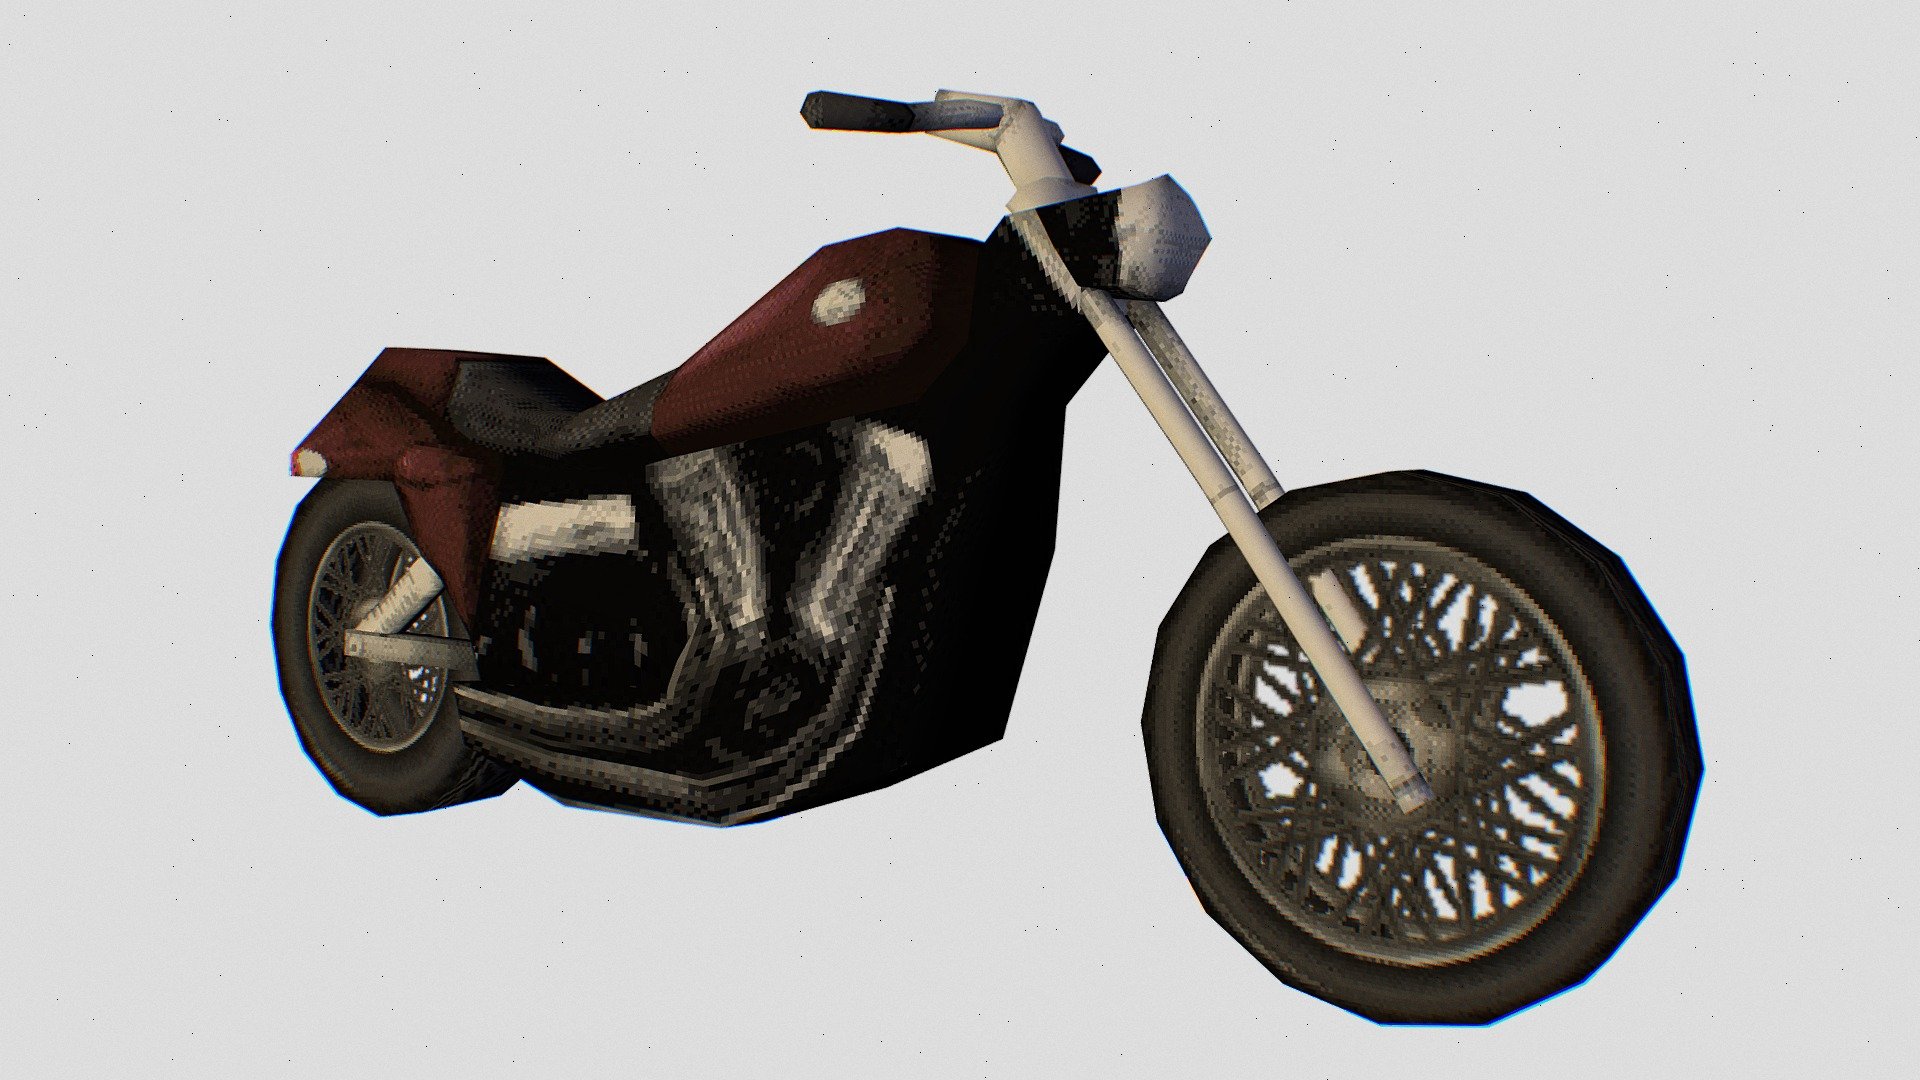 A Chopper, Need I say more ?

Designed for retro inspired projects or mobile games.

My YouTube channel where I document my game dev journey - https://www.youtube.com/@AaronMYoung Contact me on - Aaronmyoung94@gmail.com - PS1 Style Asset - Chopper-Bike - 3D model by AaronMYoung 3d model